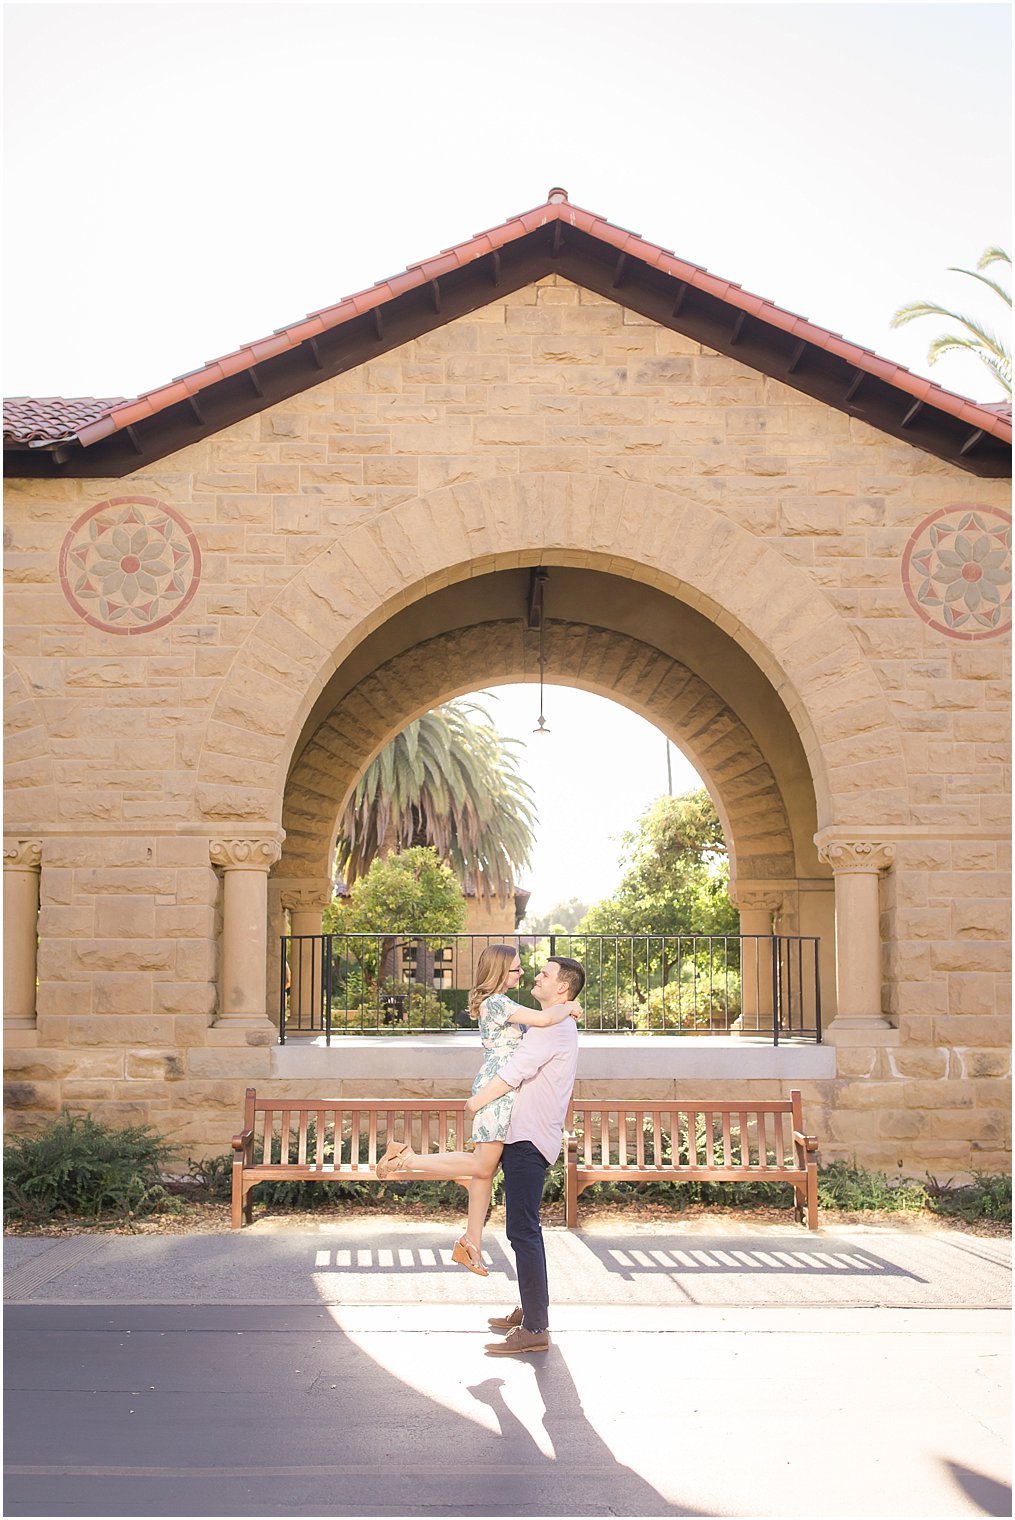 Groom lifting his bride during engagement session at Stanford University